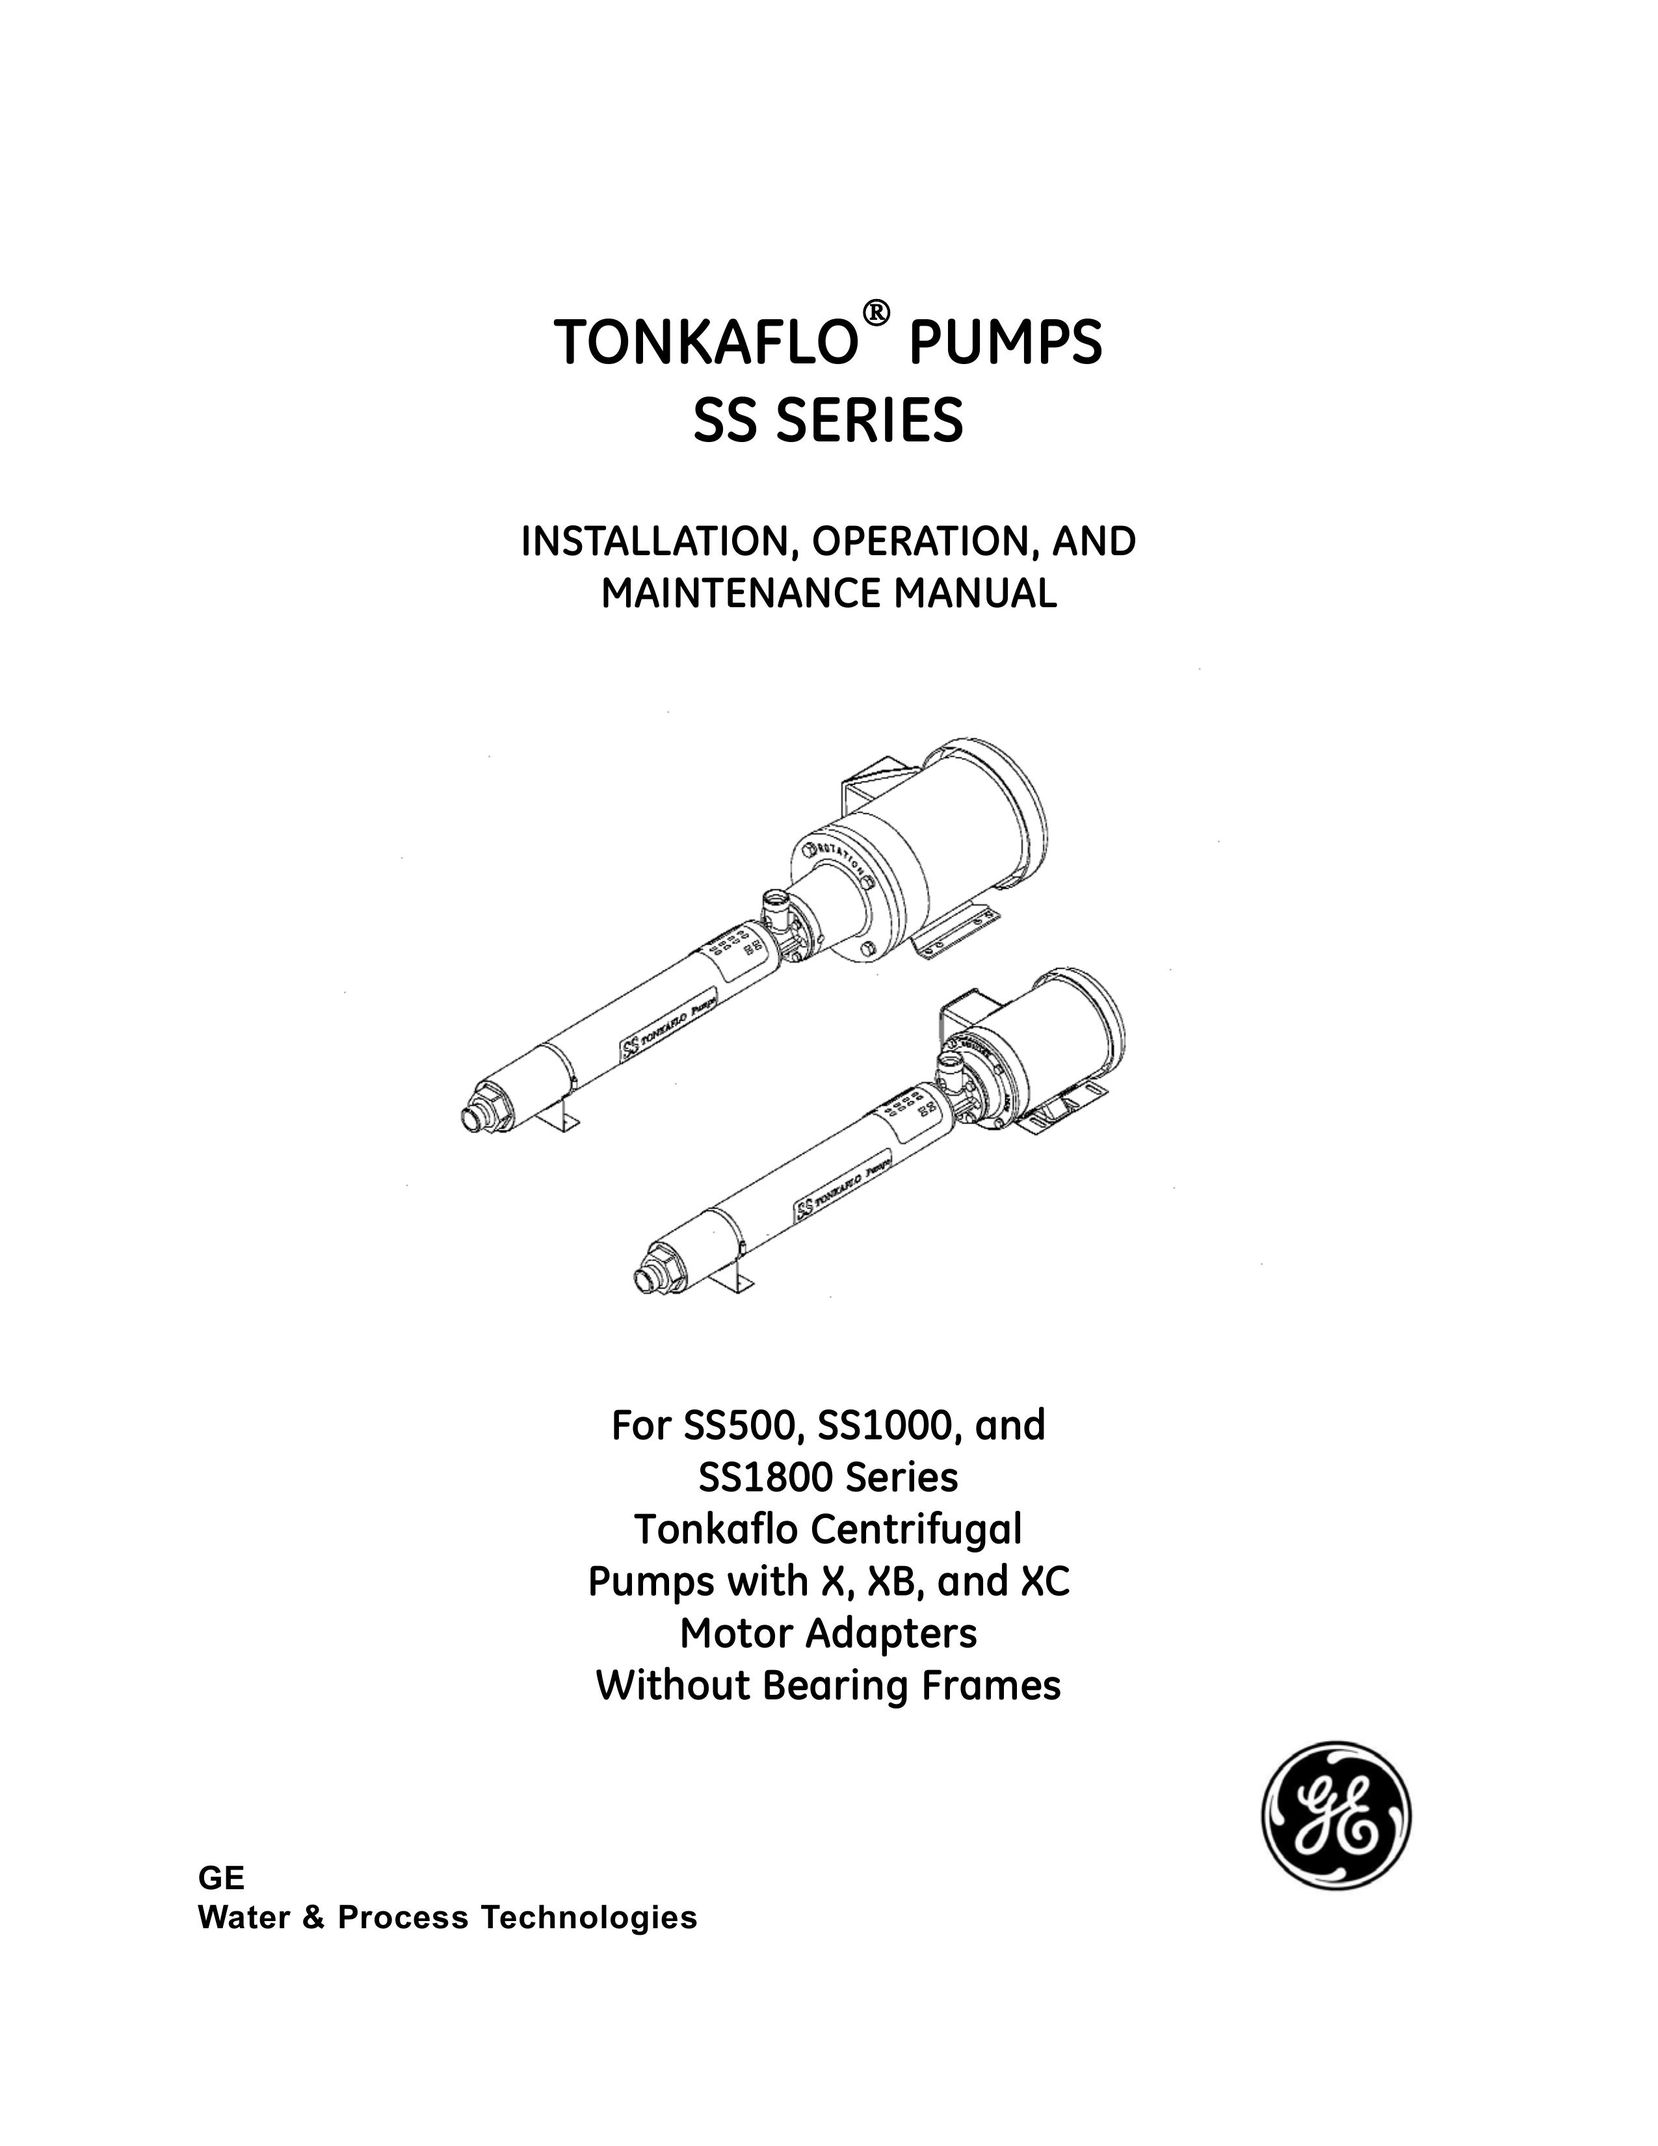 GE SS1800 Septic System User Manual